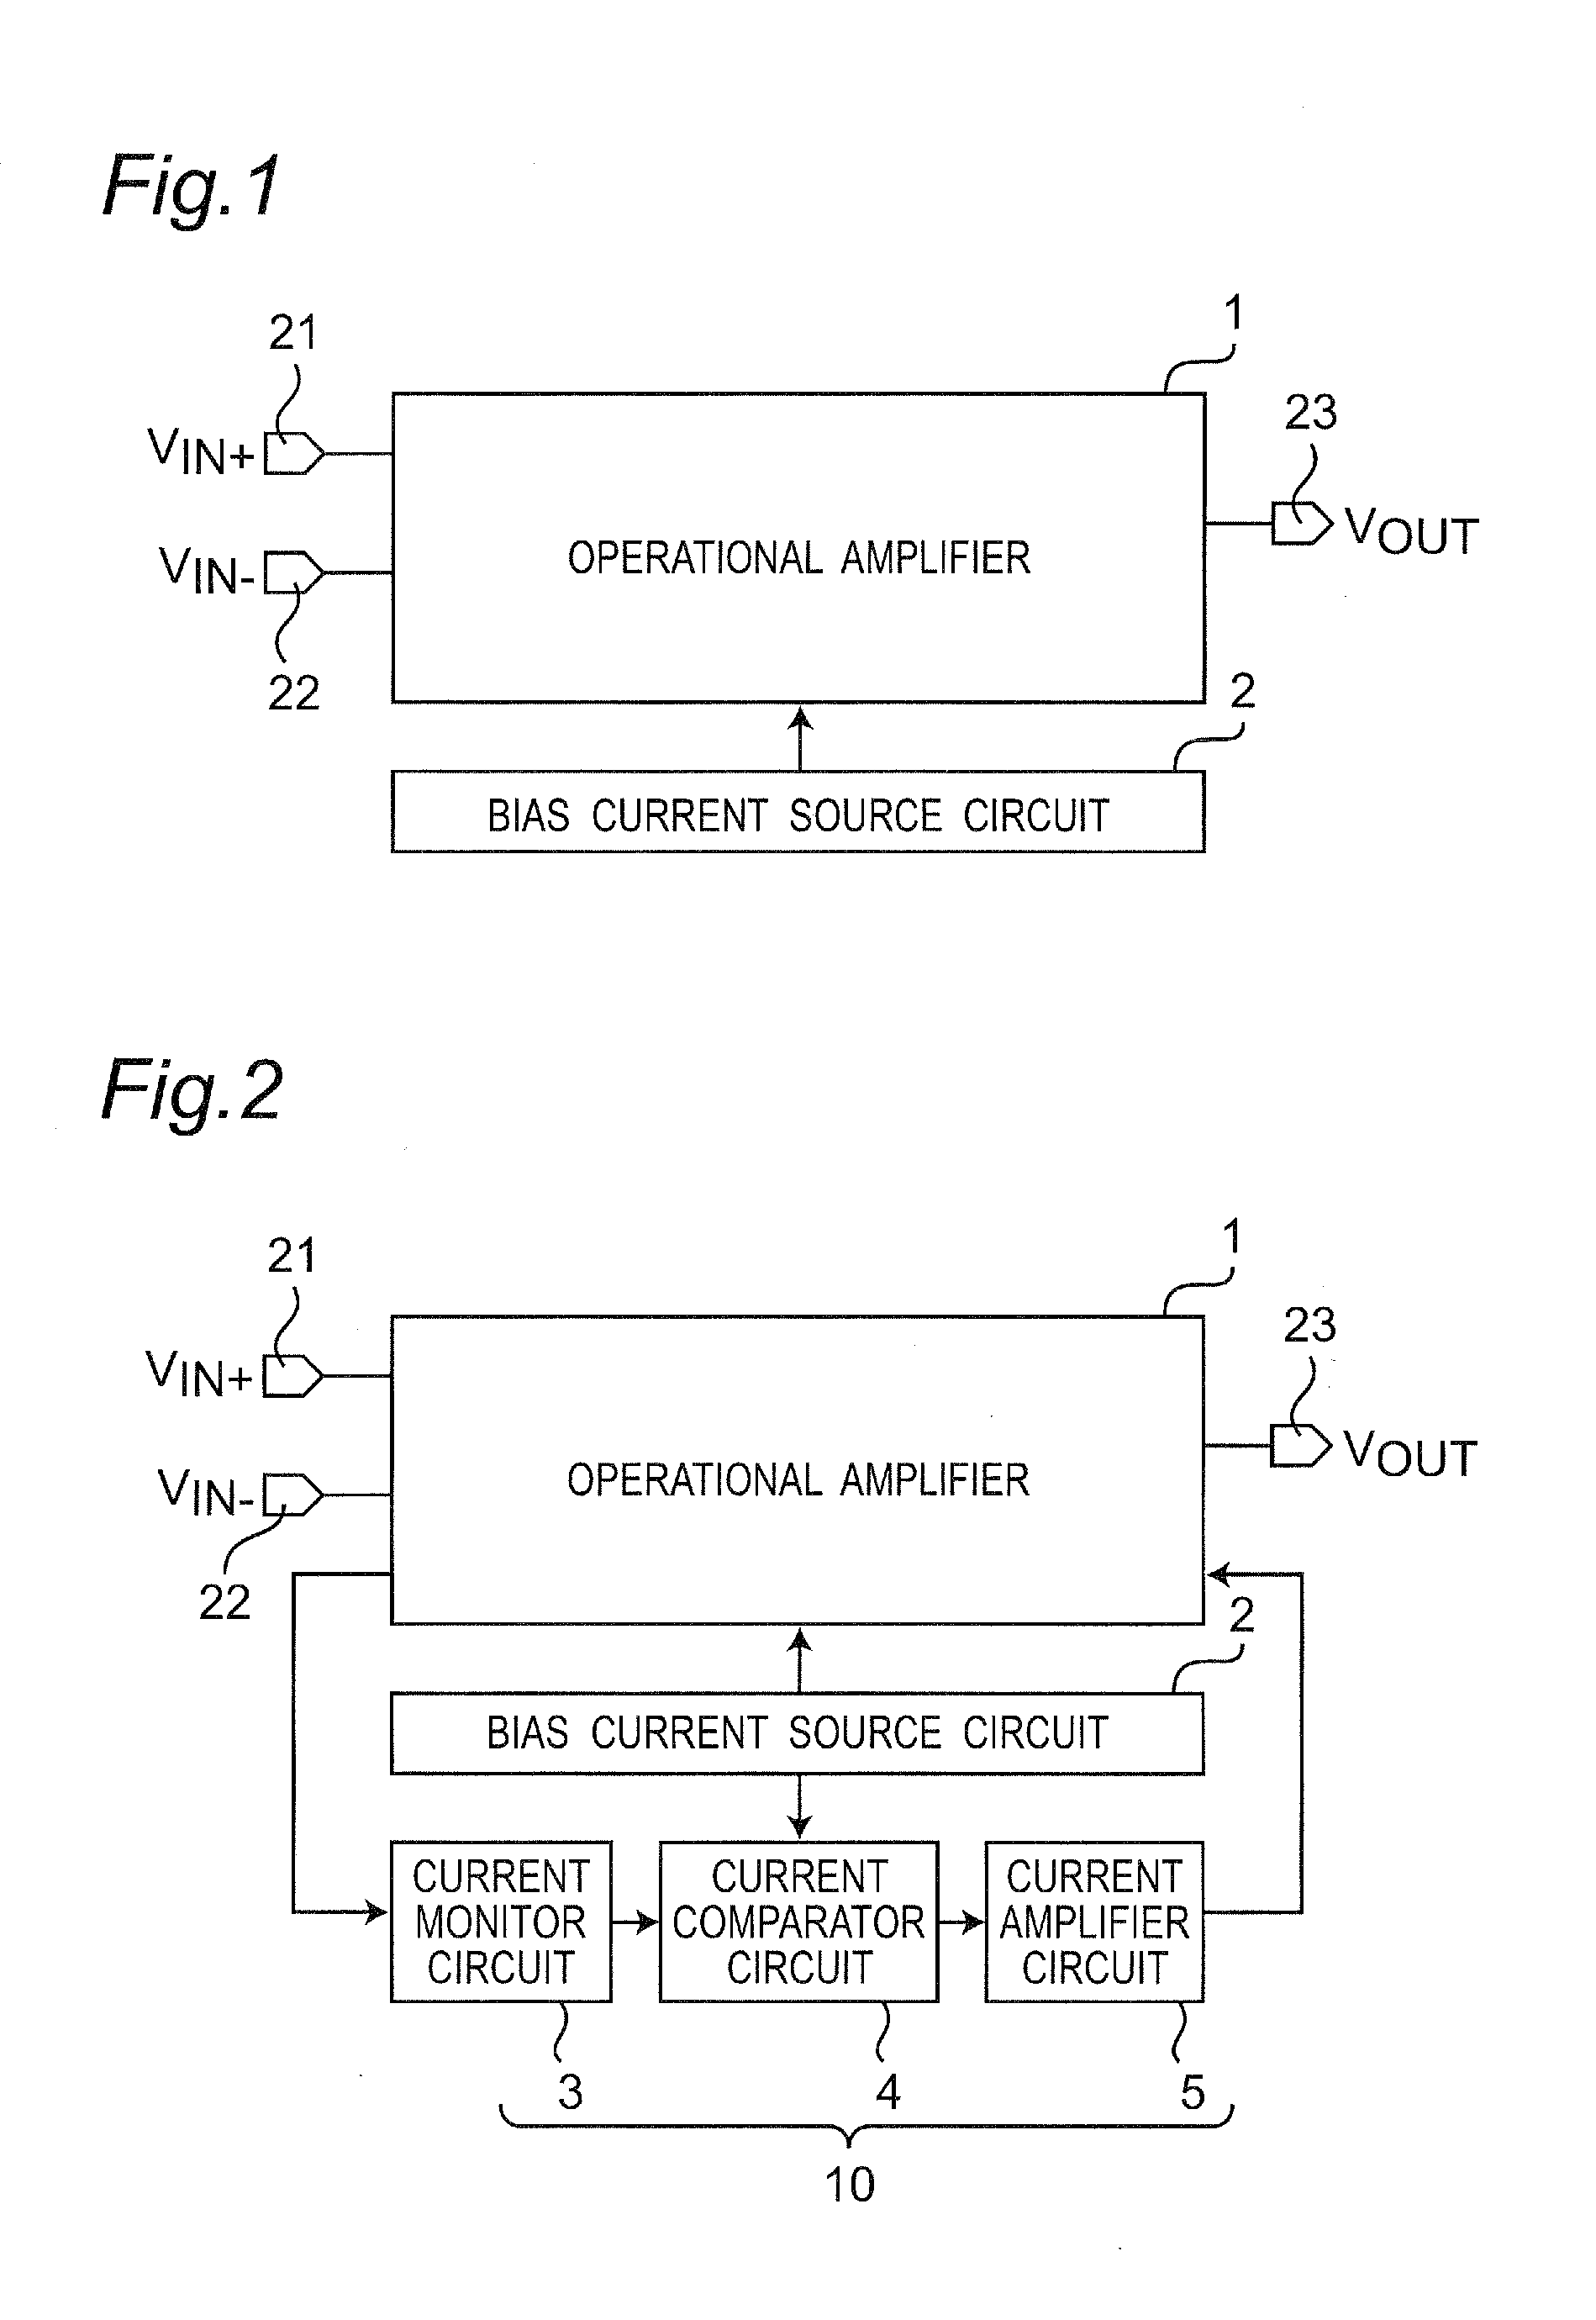 Differential amplifier circuit with ultralow power consumption provided with adaptive bias current generator circuit